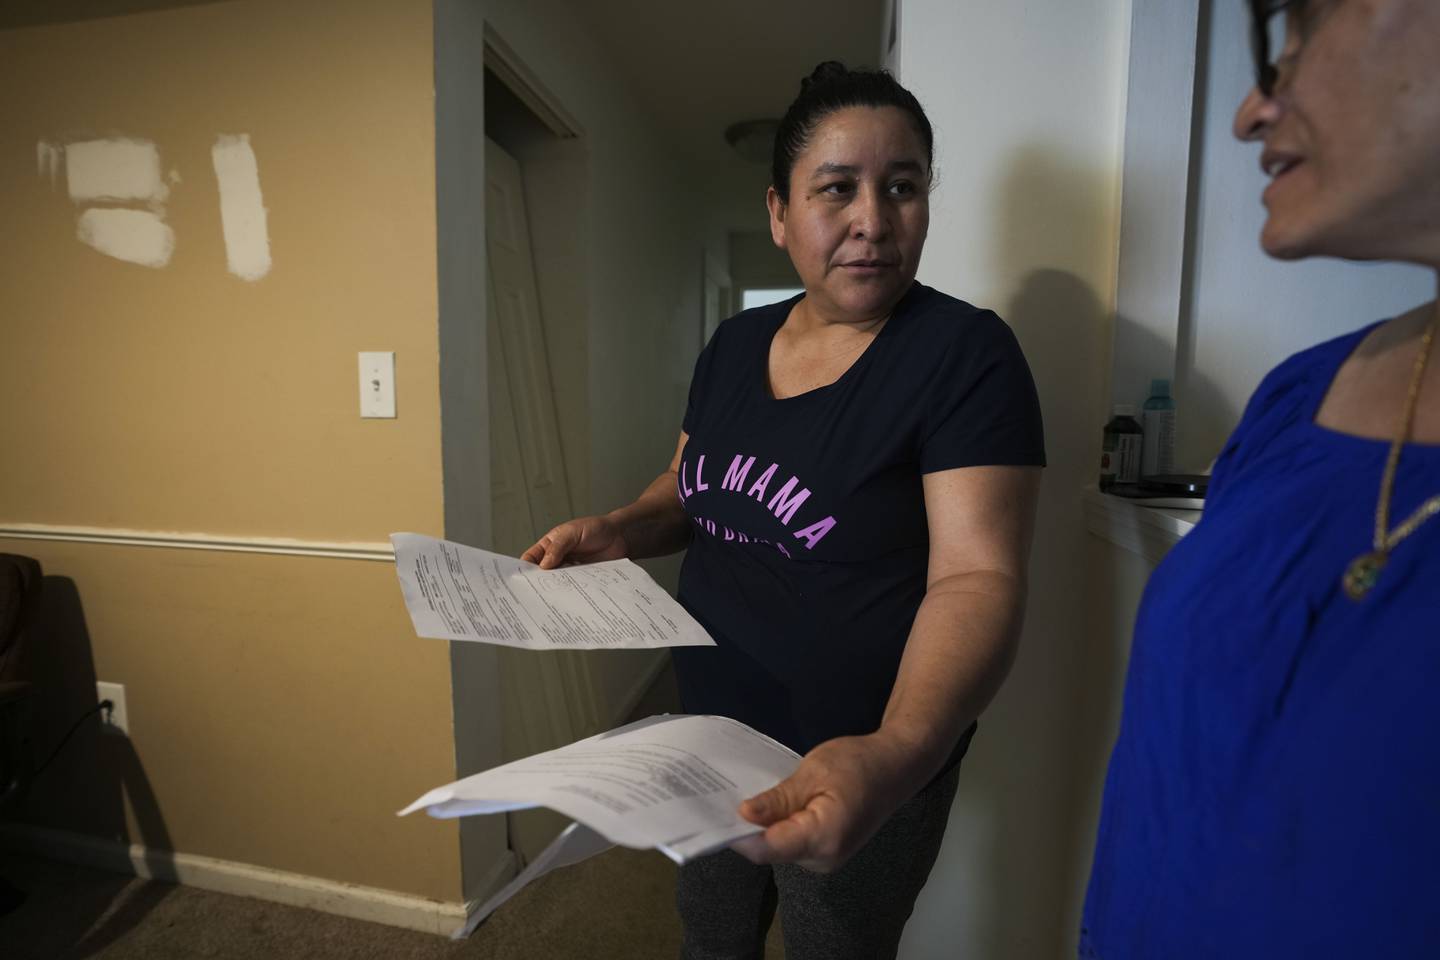 Verónica del Cid Gaitán, an undocumented immigrant, shows paperwork from a recent surgery to Viviana Lozano and CASA lead organizer. Gaitán has had one recent follow-up appointment with another scheduled in June and has no insurance to cover them. She is pictured here in her home on April 14, 2023.